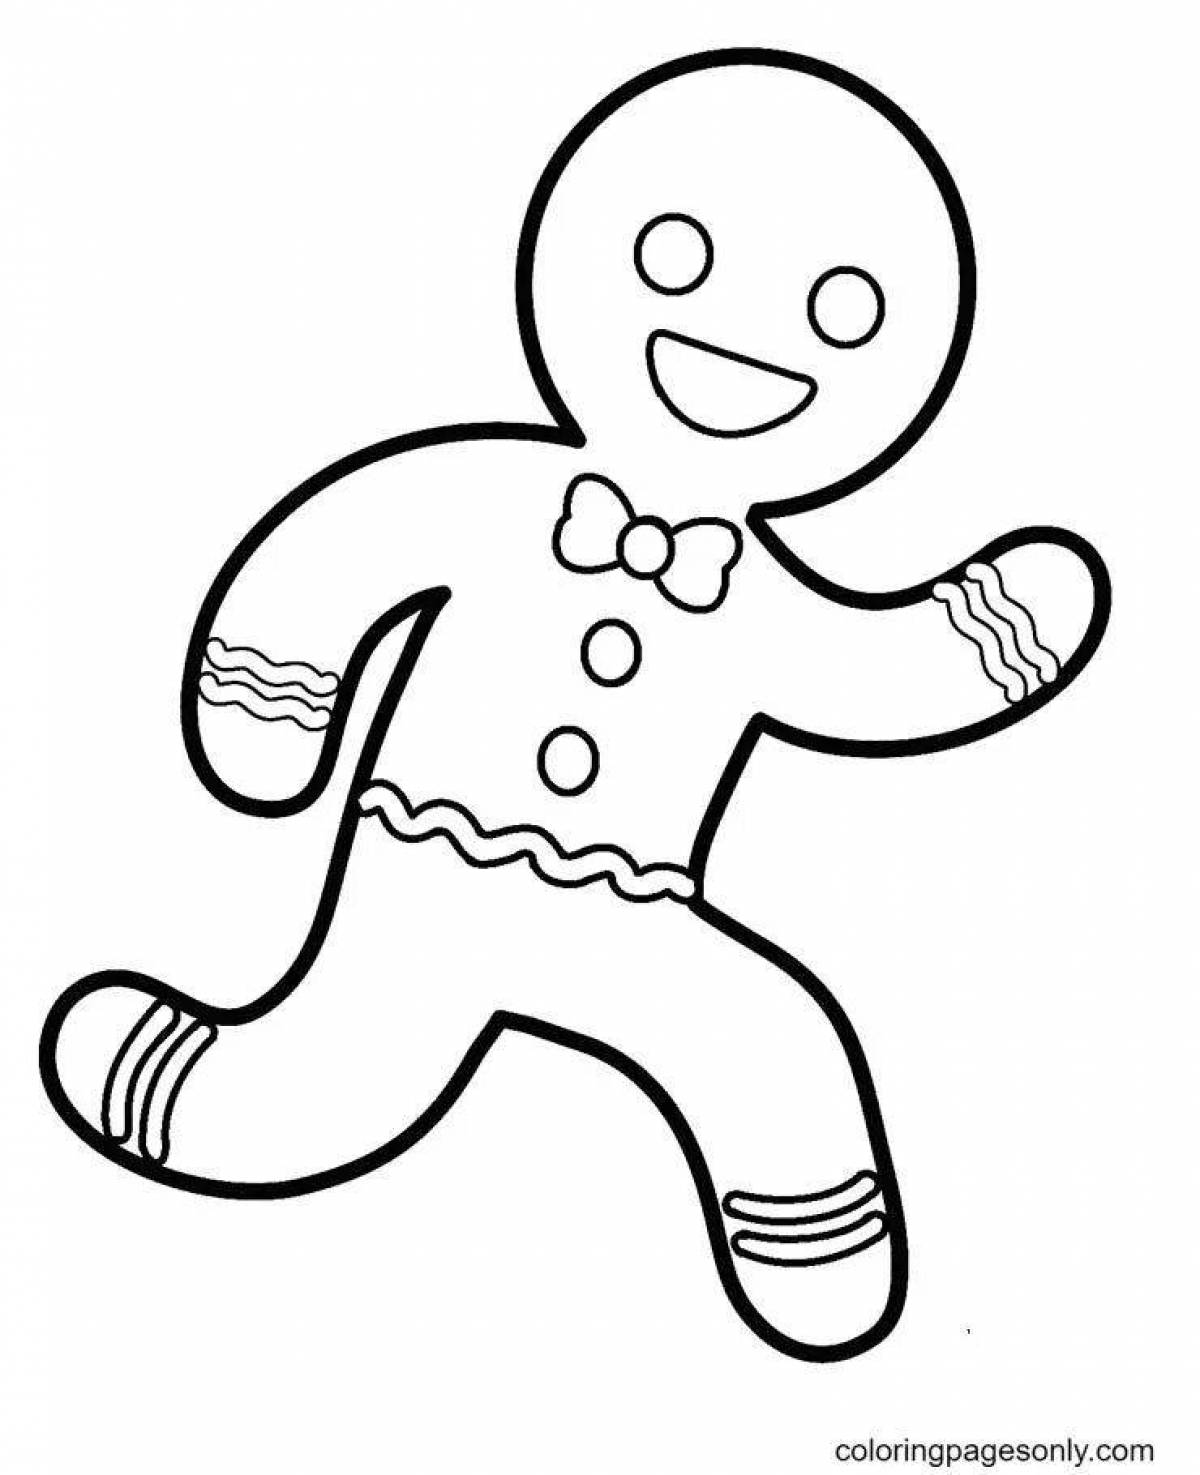 Animated man coloring page